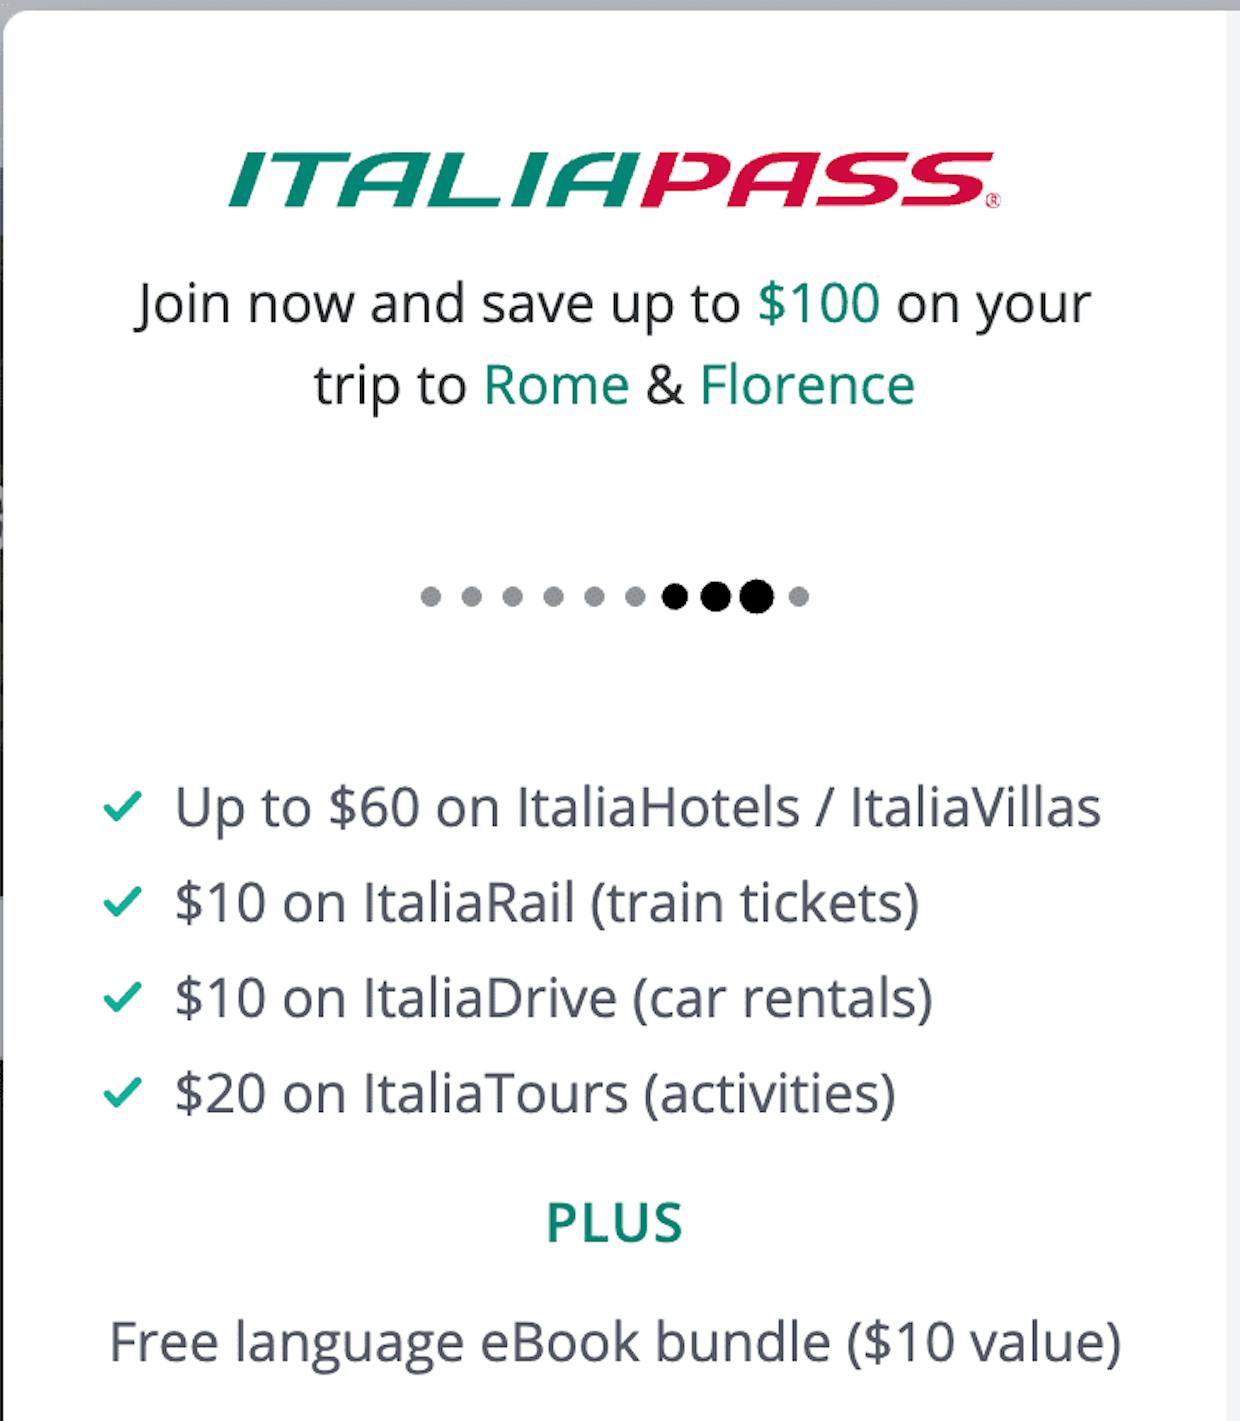 I am new to Italia Pass. How do I take advantage of the $100 off rail tickets offer